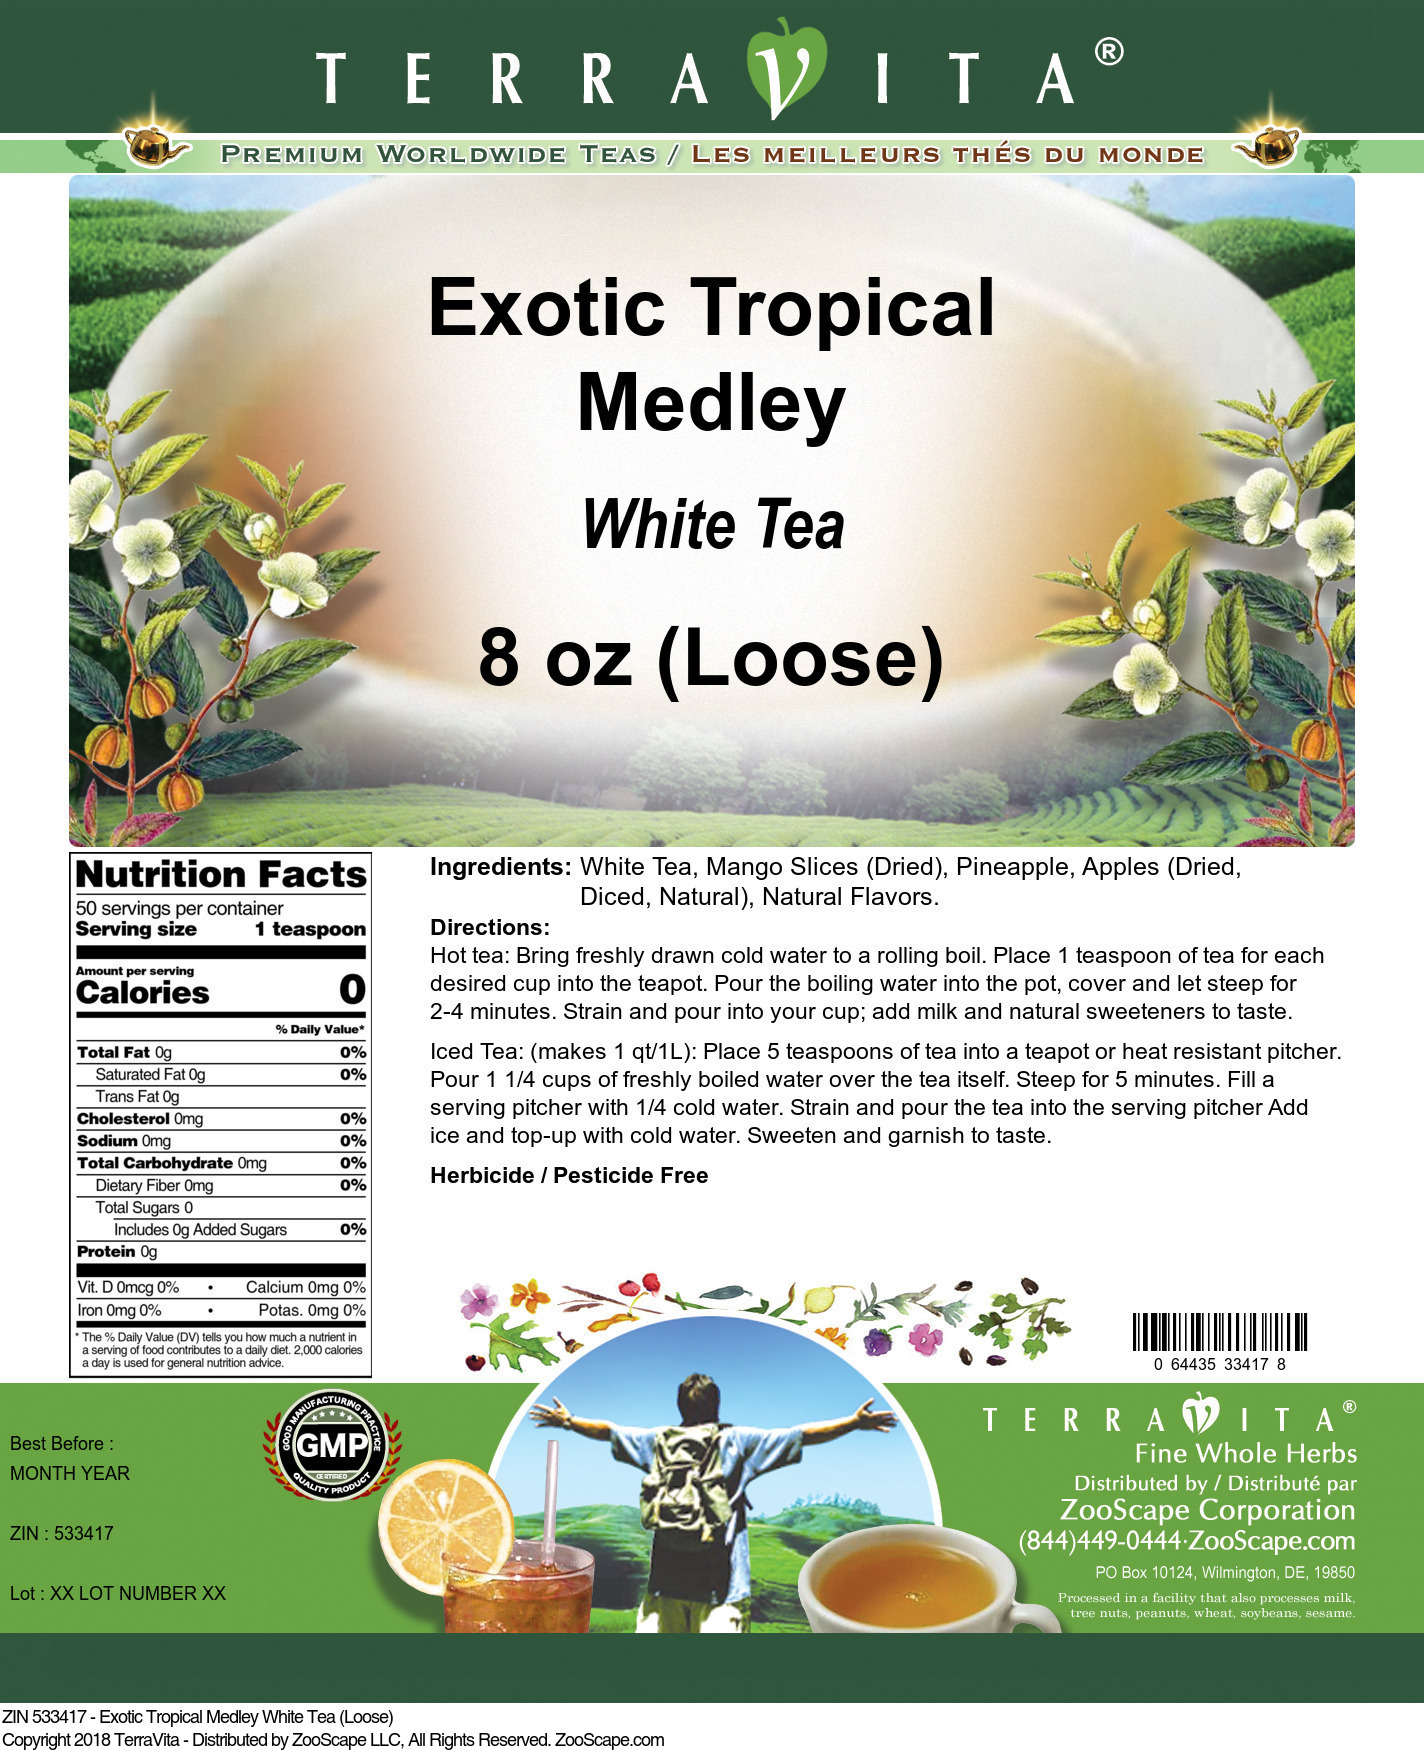 Exotic Tropical Medley White Tea (Loose) - Label